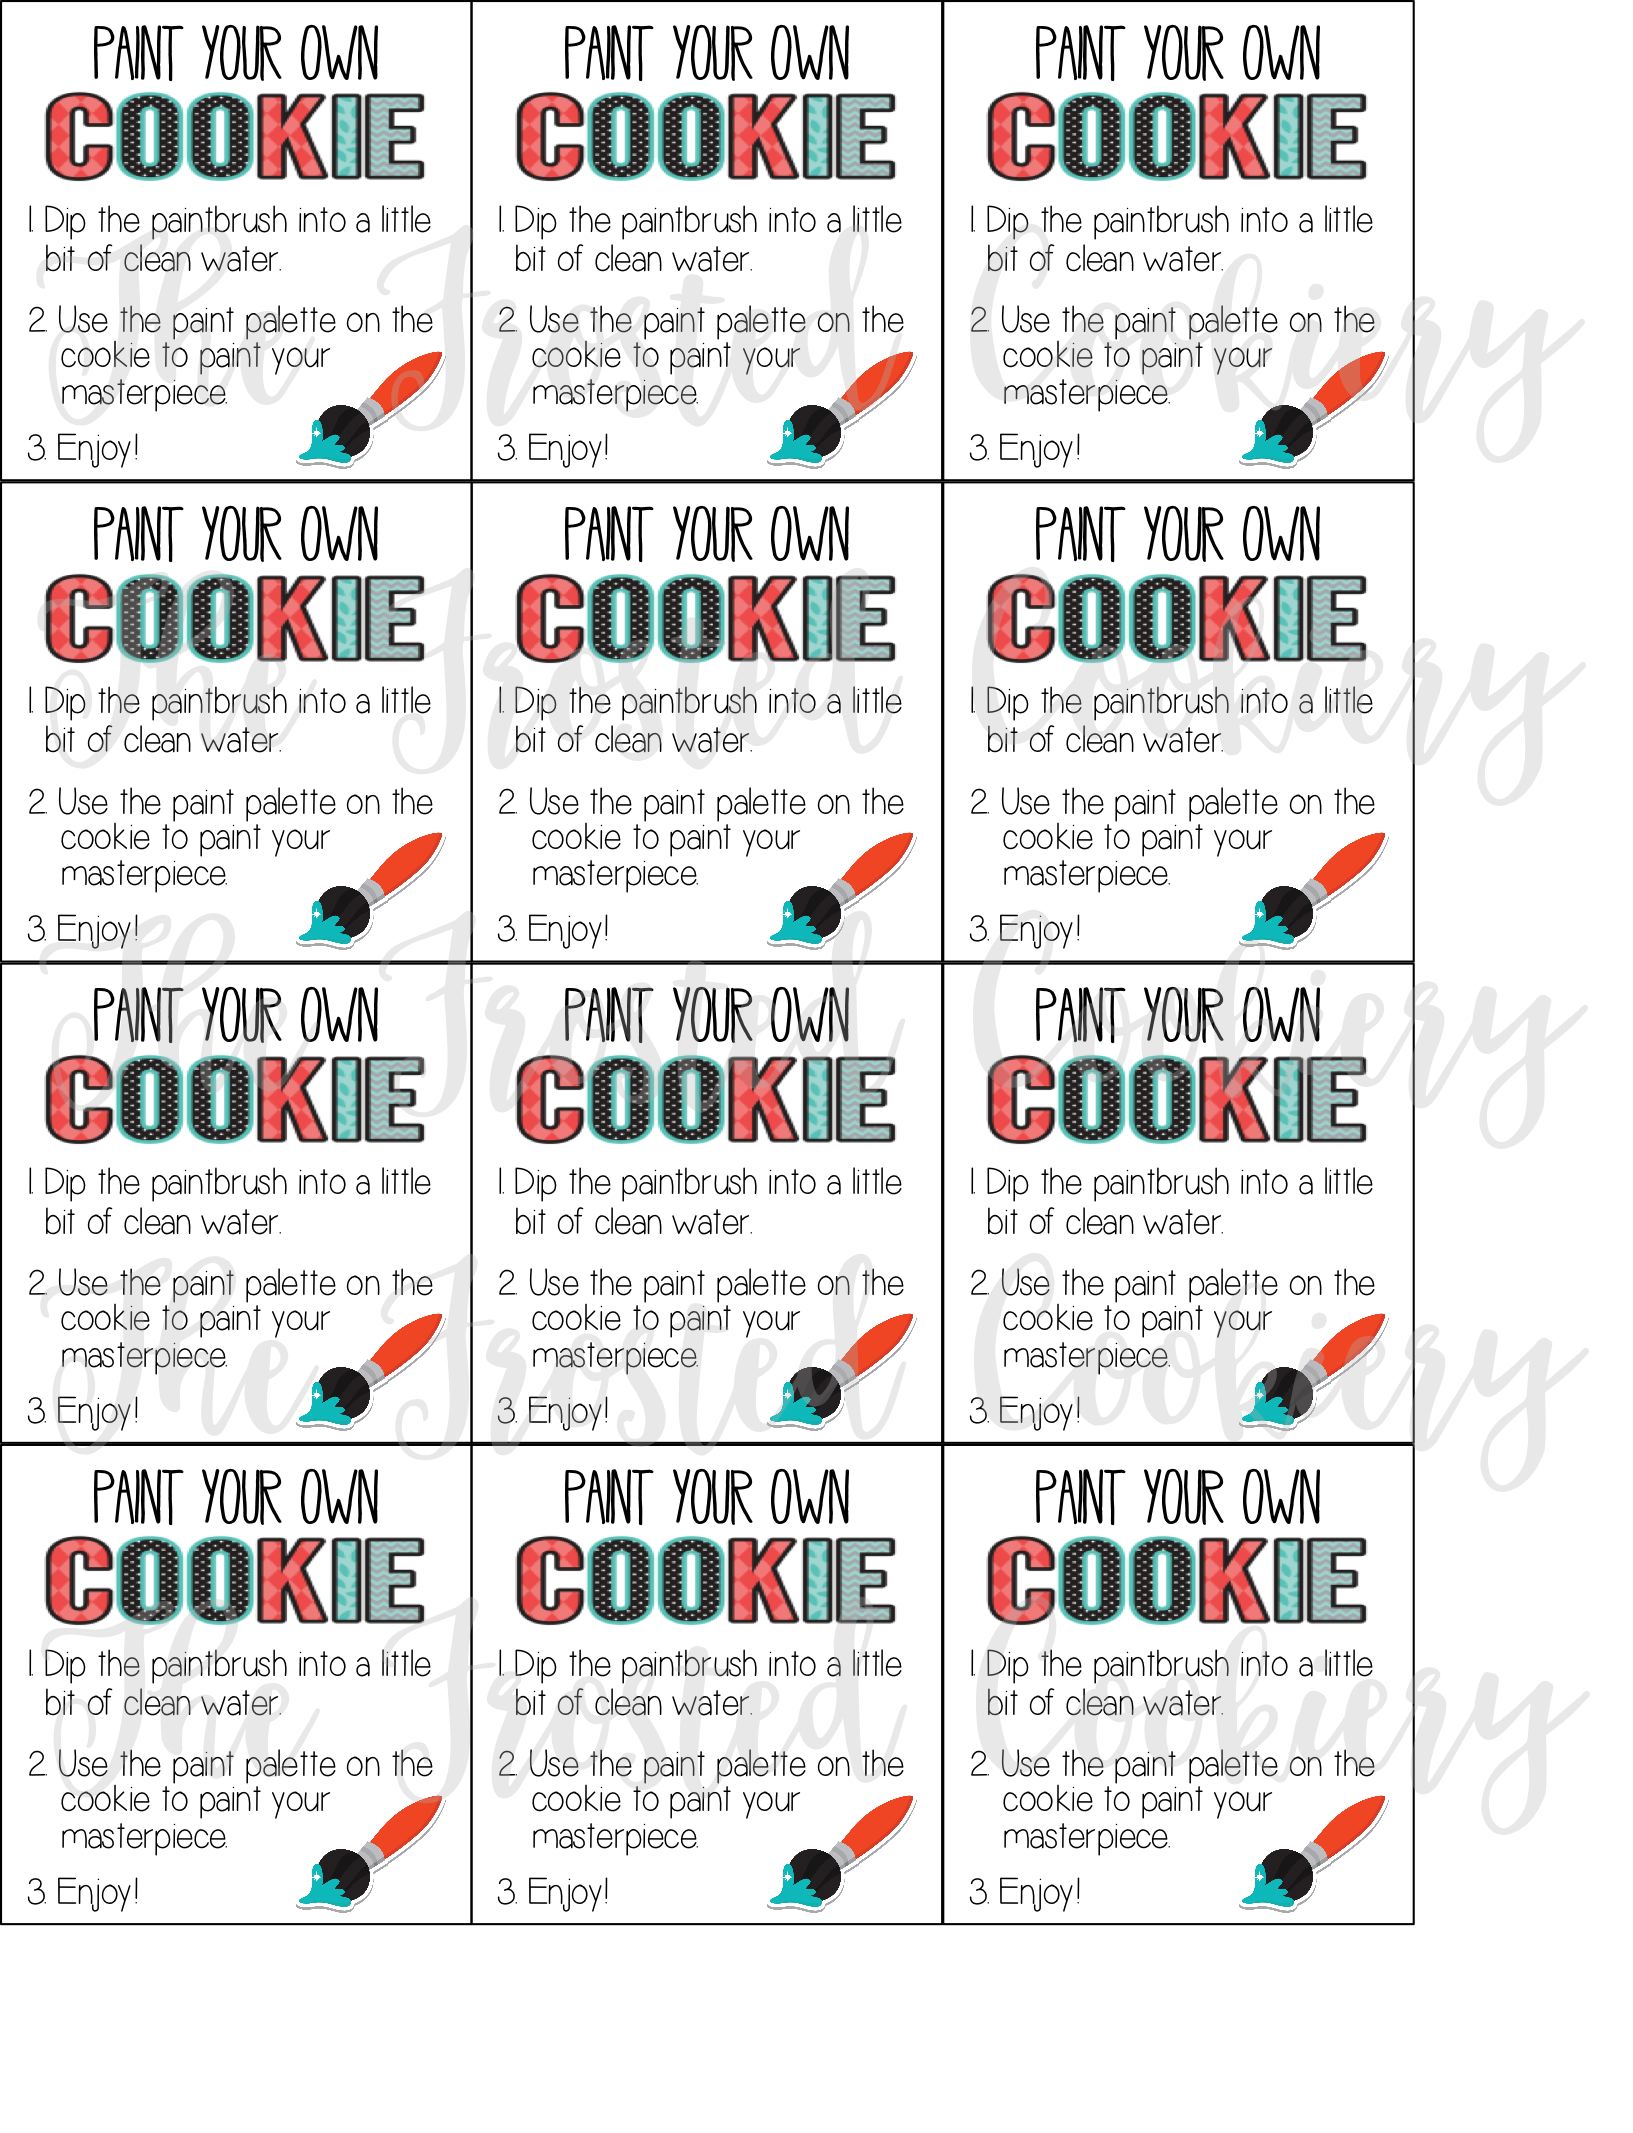 paint-your-own-cookie-instructions-cards